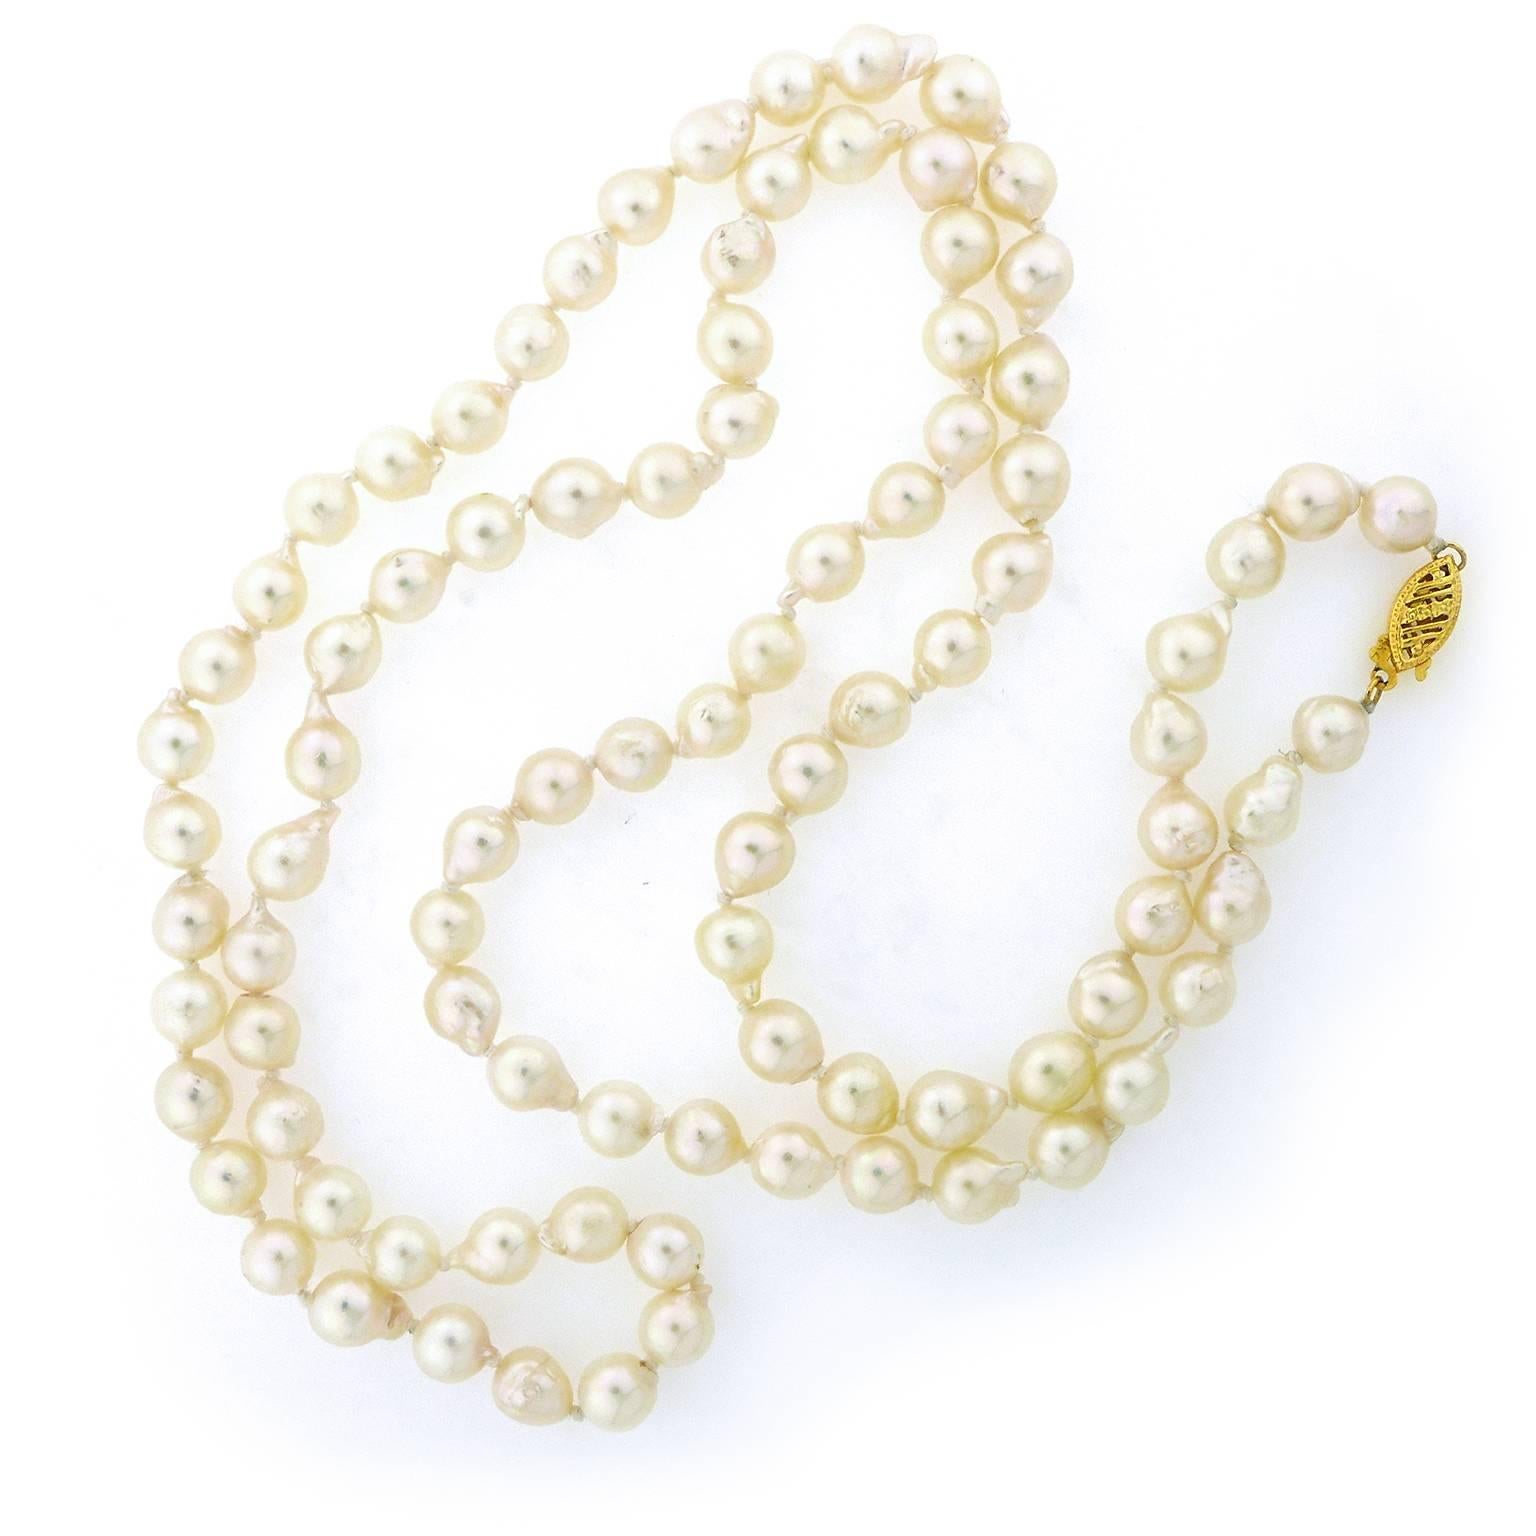 Uniform sized semi-baroque cultured pearls are creamy white colored with hints of pink and peacock. Clasp is 14 karat yellow gold filigree style. Strand measures 30 inches long including the clasp. Pearls have high luster and are overall nice quality